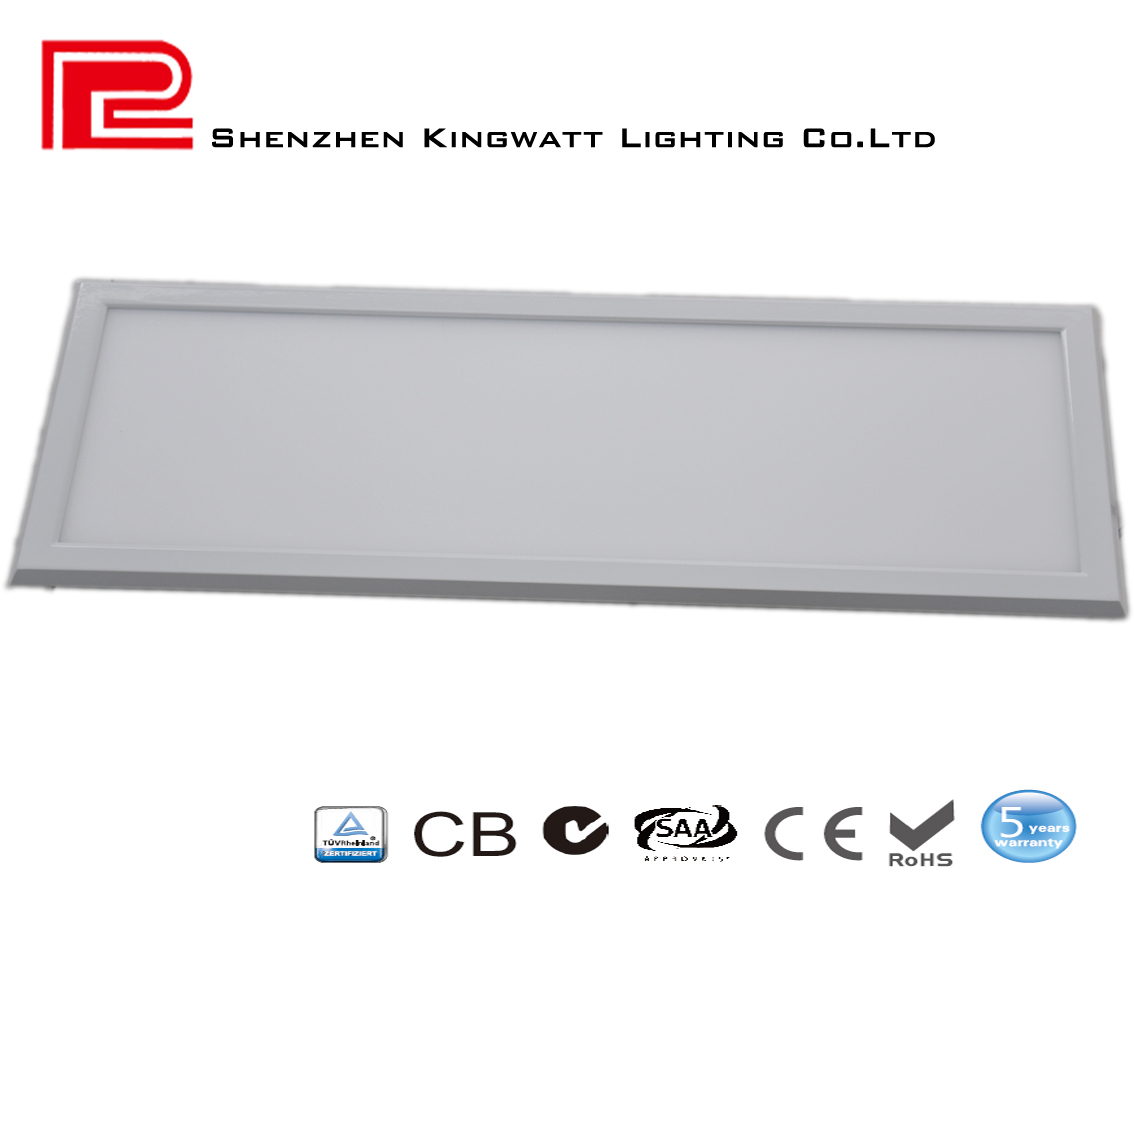 CB/CTEL/SAA/RoHS 100Lm/W LED Panel Light，600mm*1200mm with 60W